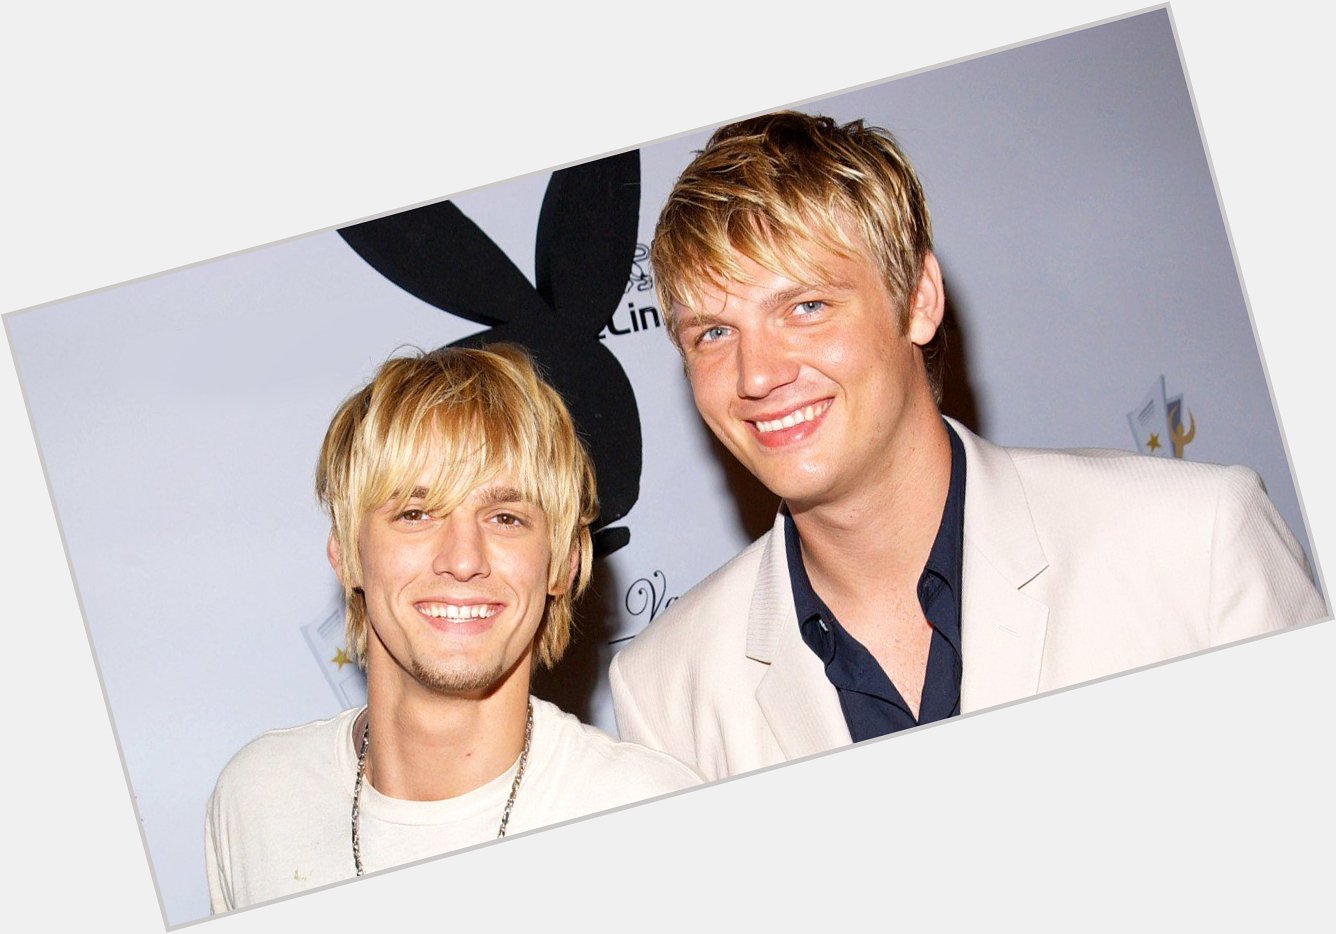 (Nick Carter Wishes Brother Aaron Carter Happy Birthday After Feud)
 